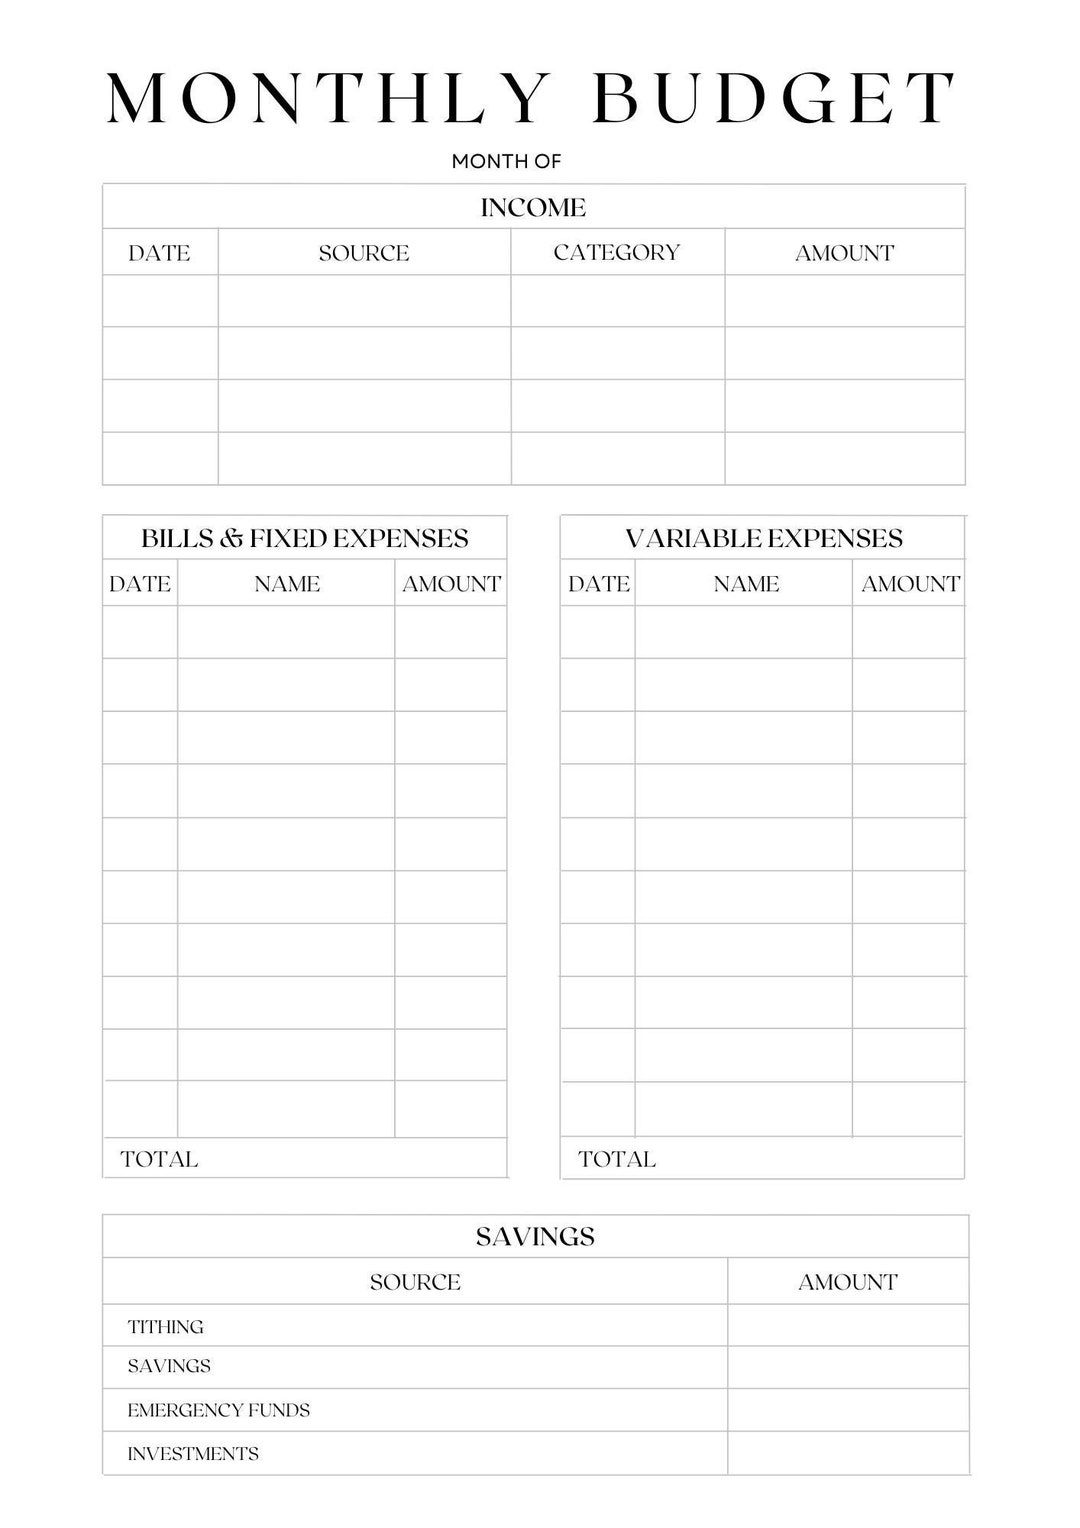 printable-monthly-budget-worksheet-etsy-finland